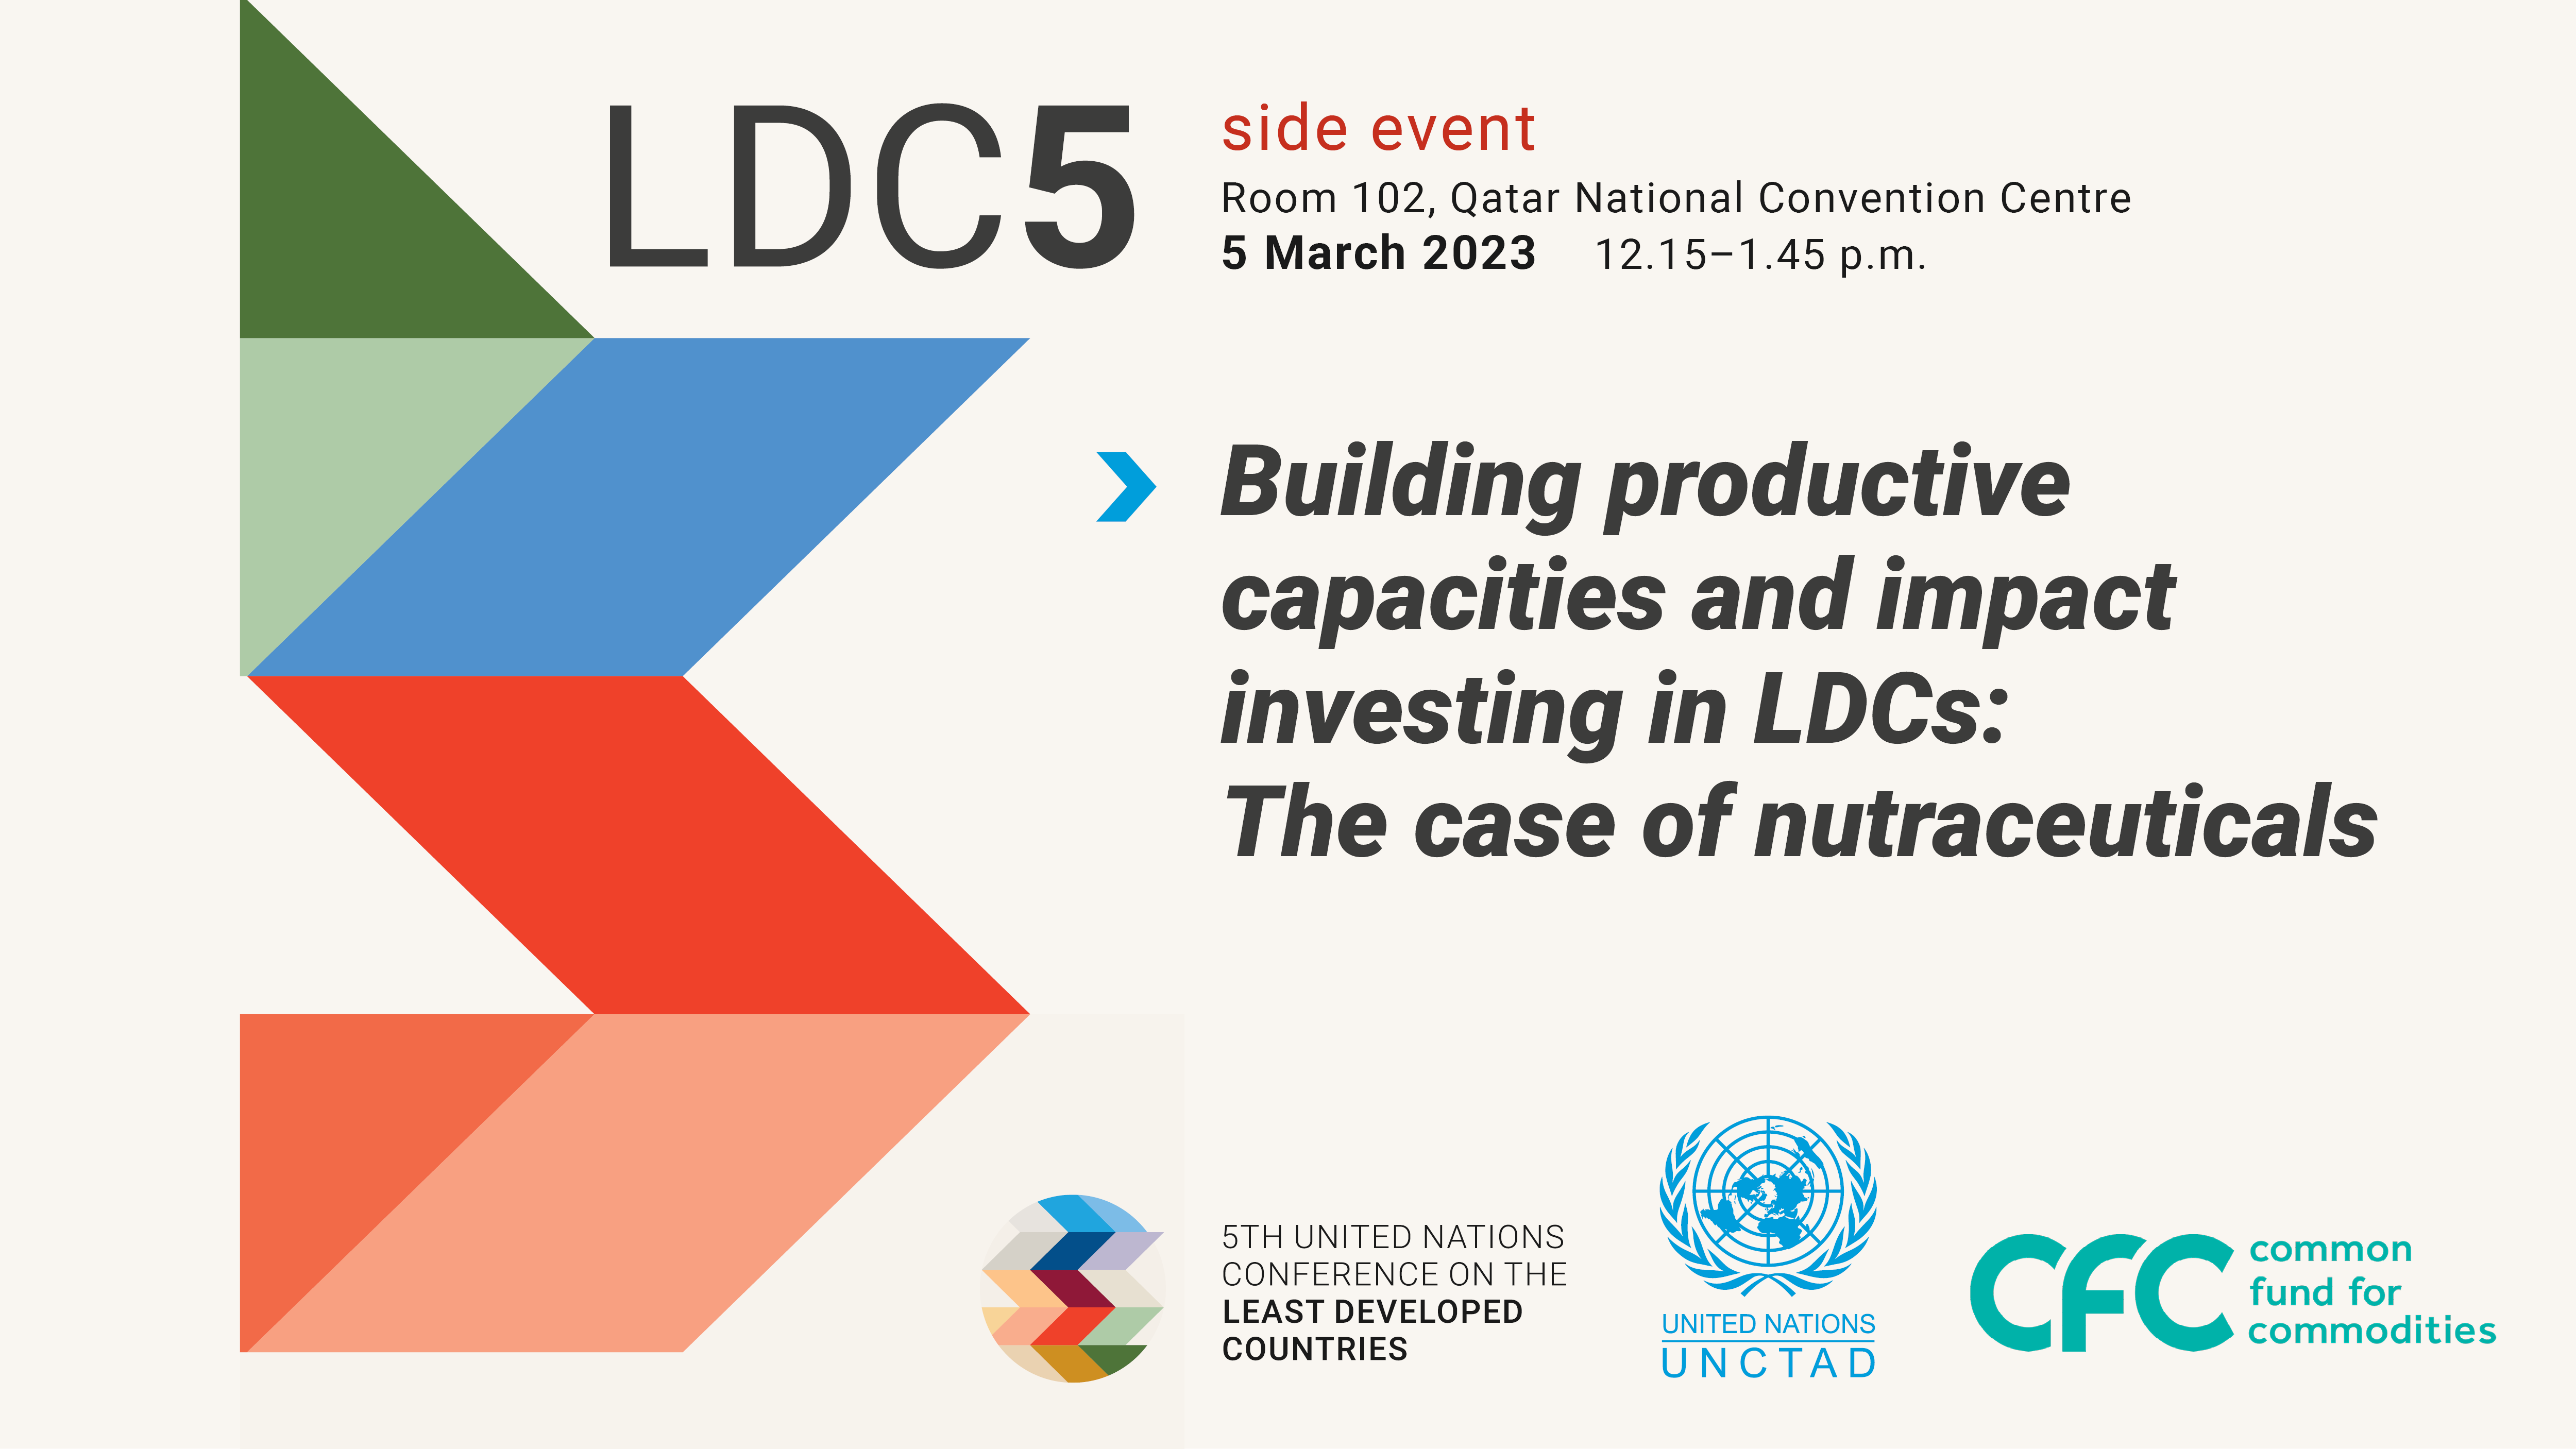 LDC5 side event: Building productive capacities and impact investing in LDCs: The case of nutraceuticals